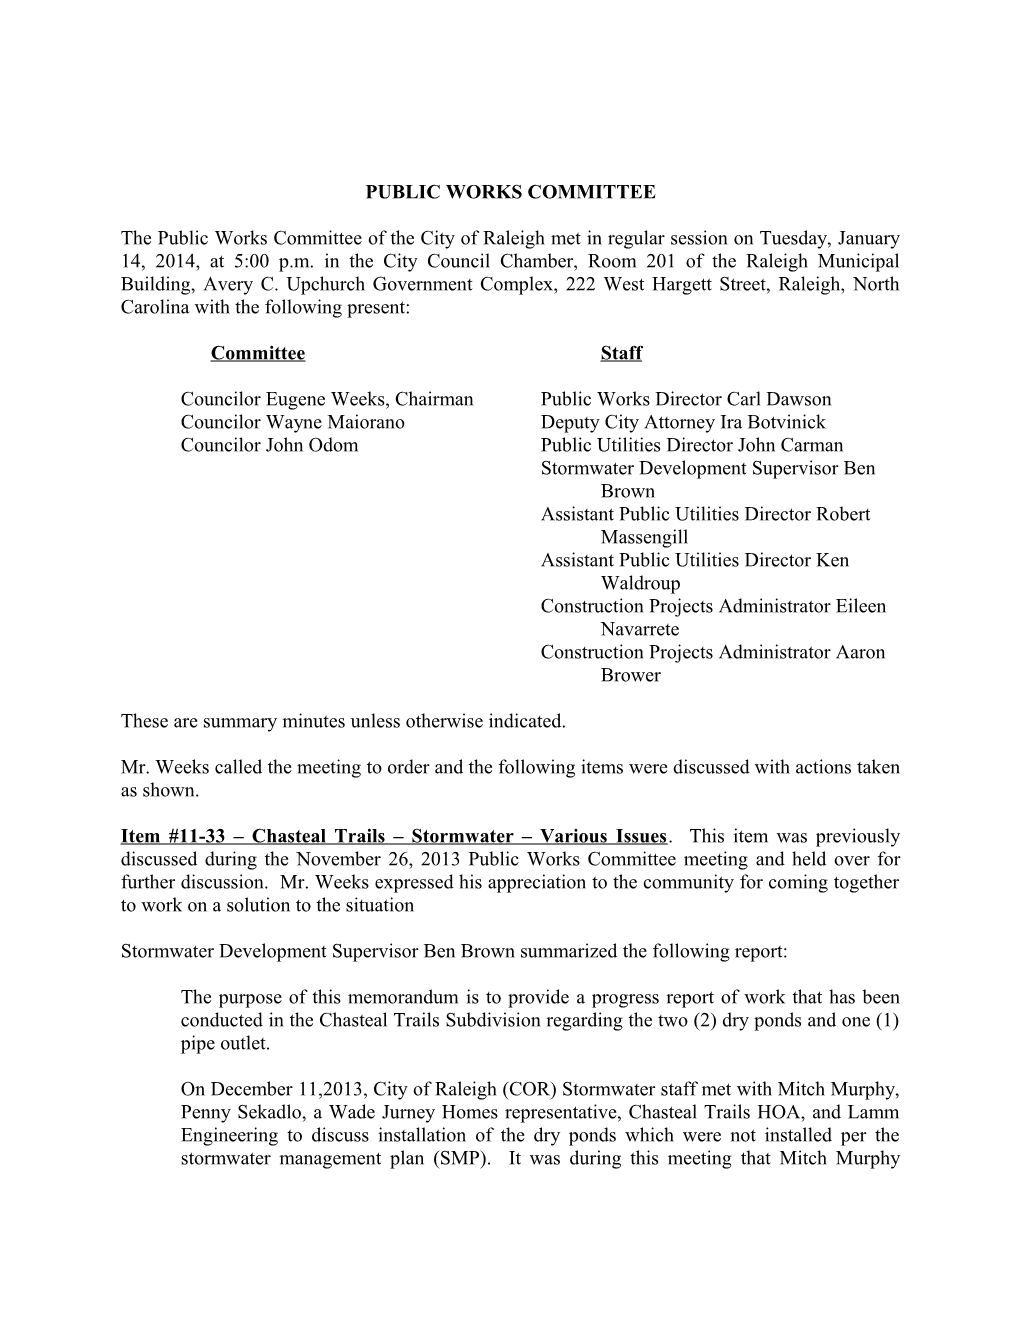 Public Works Committee Minutes - 01/14/2014